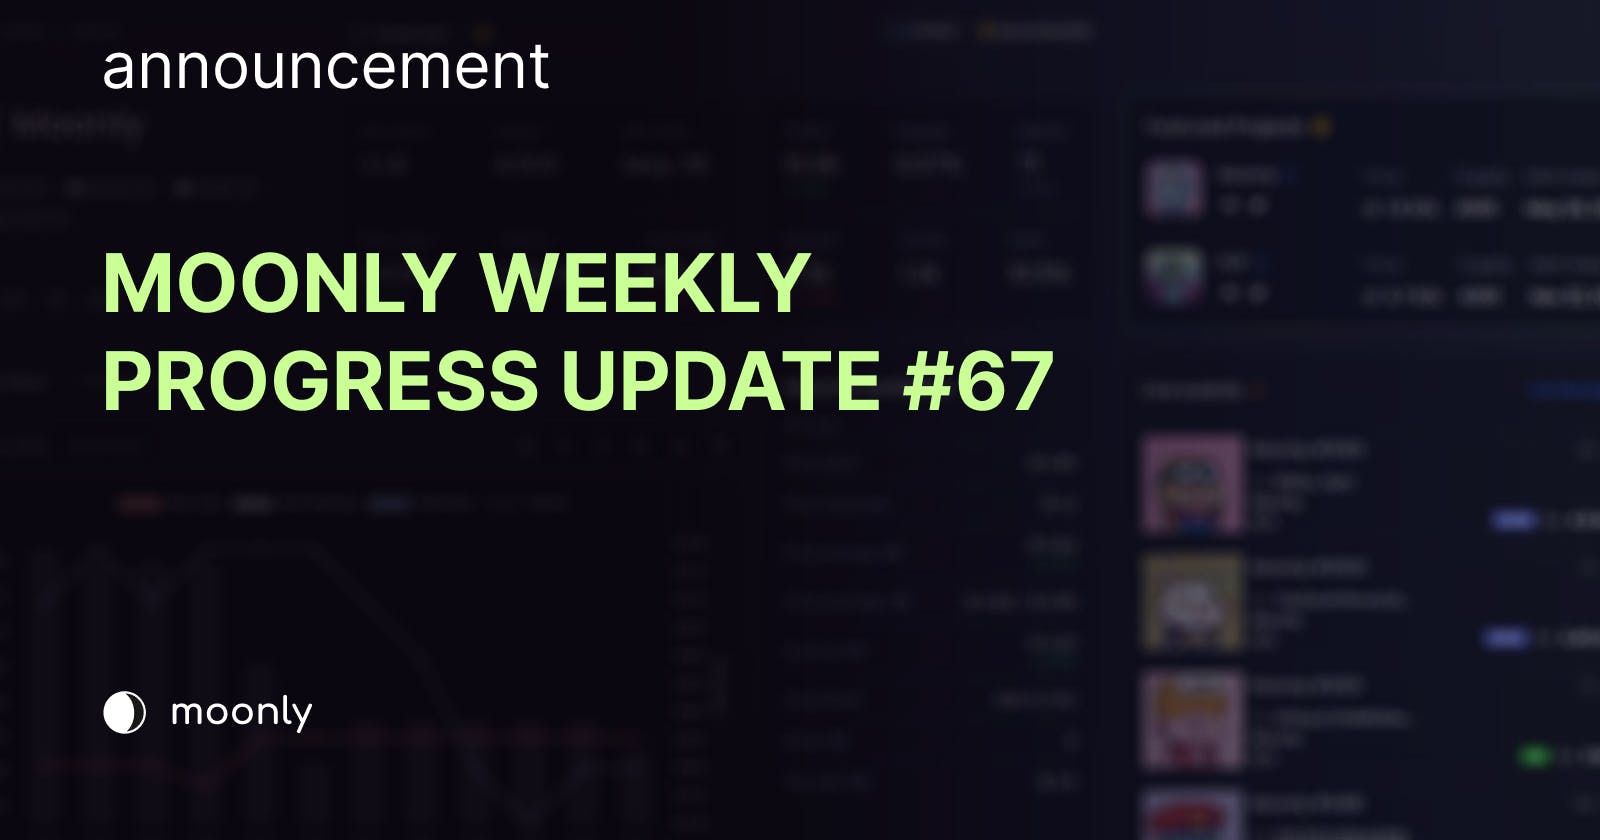 Moonly weekly progress update #67 - Staking V2